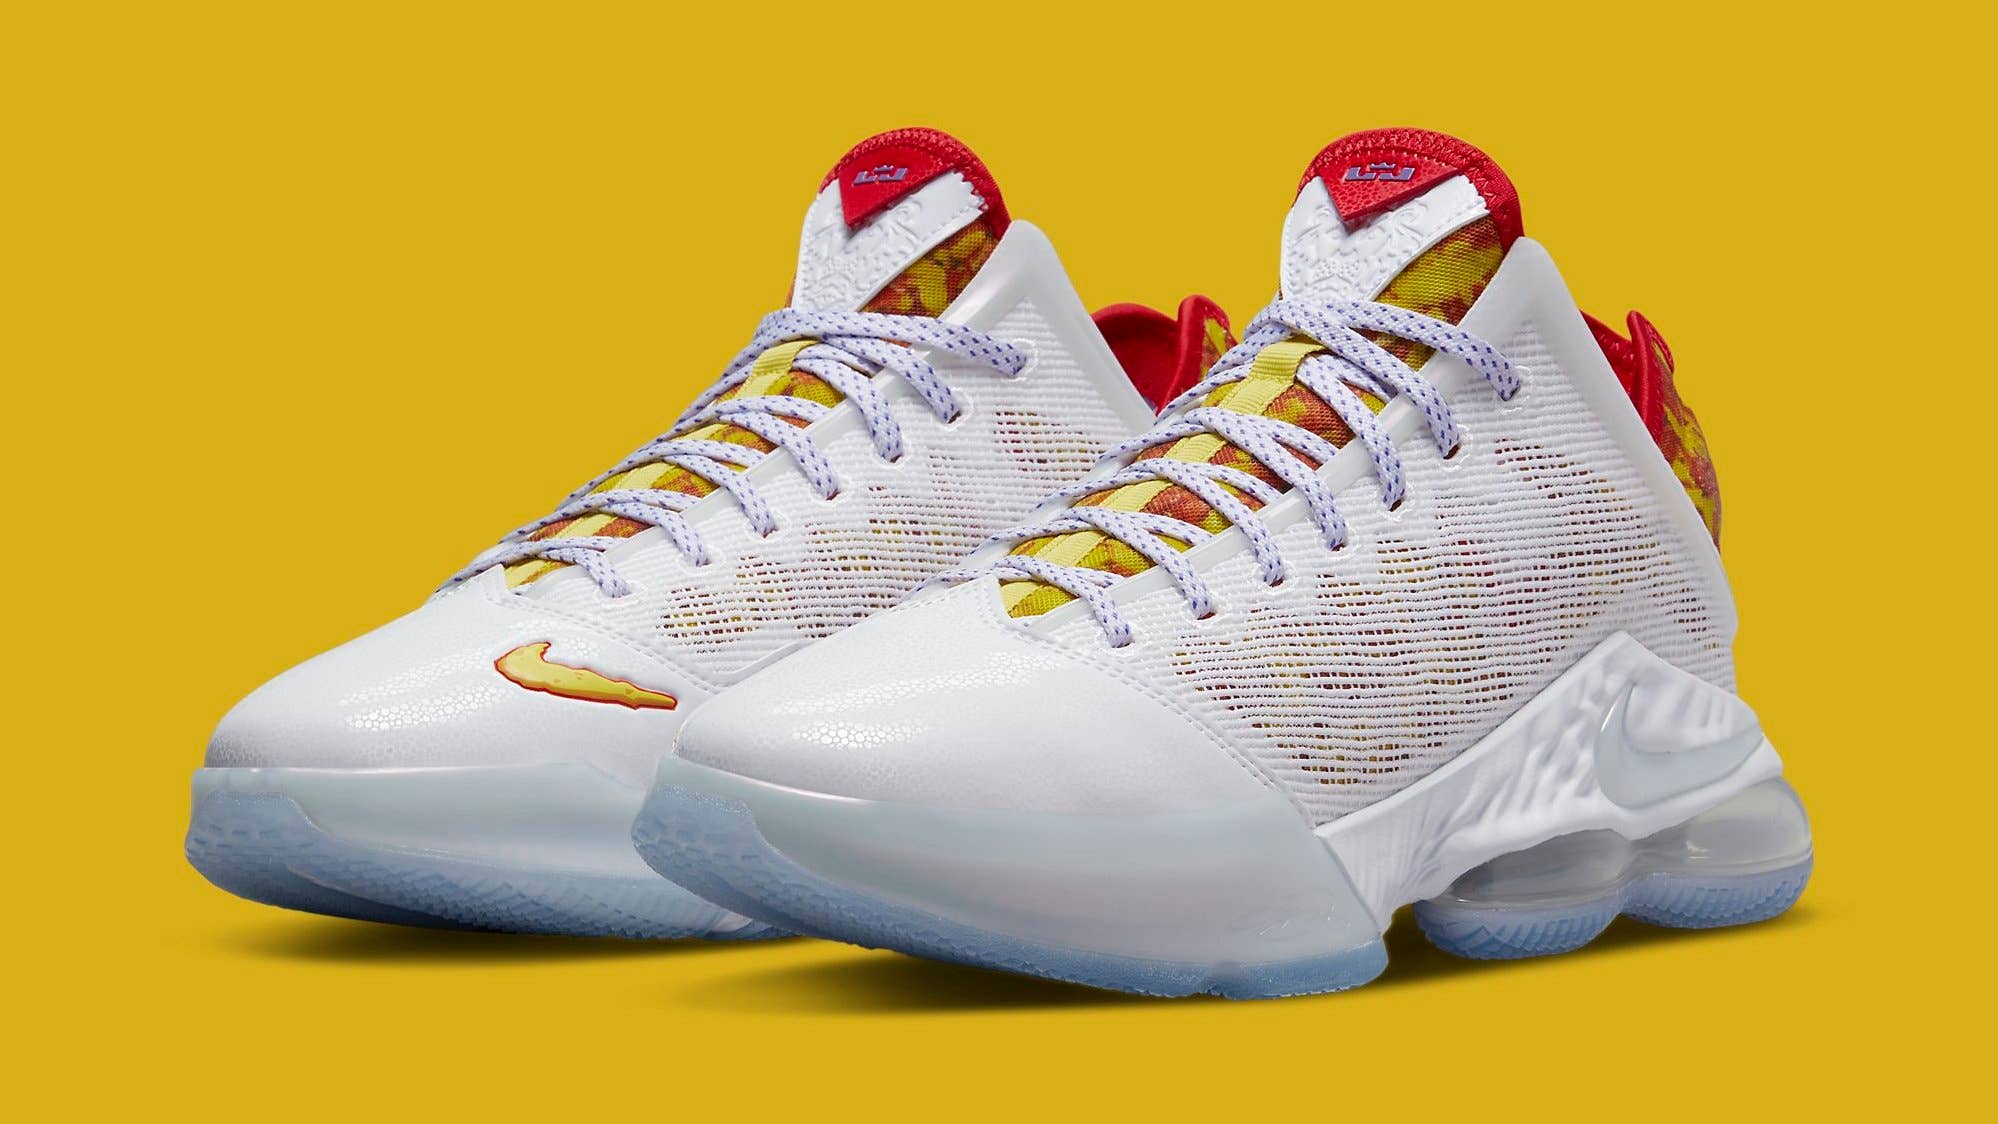 LeBron James' Next 'Fruity Pebbles' Sneaker Is Dropping in March | Complex